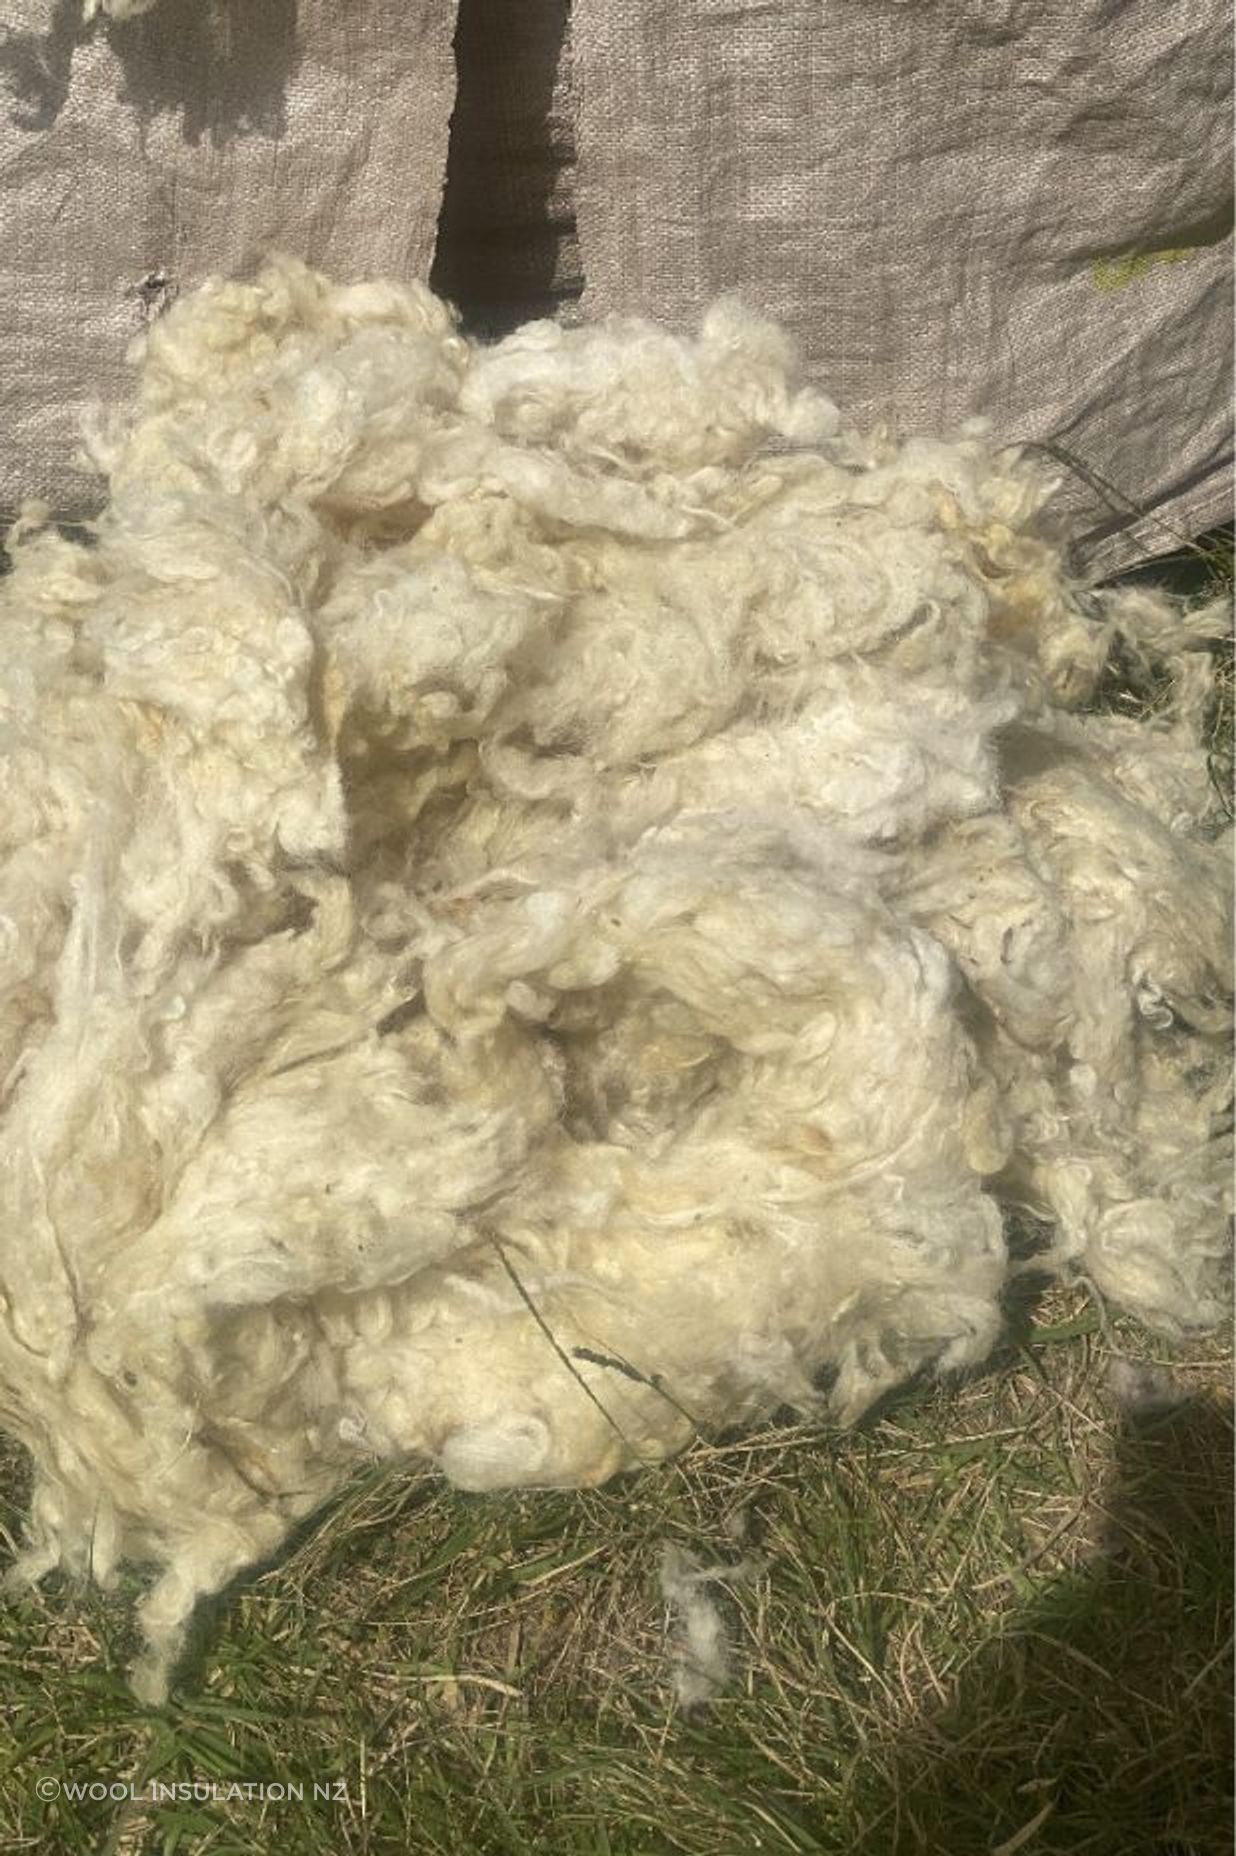 Loose wool from Wool Insulation